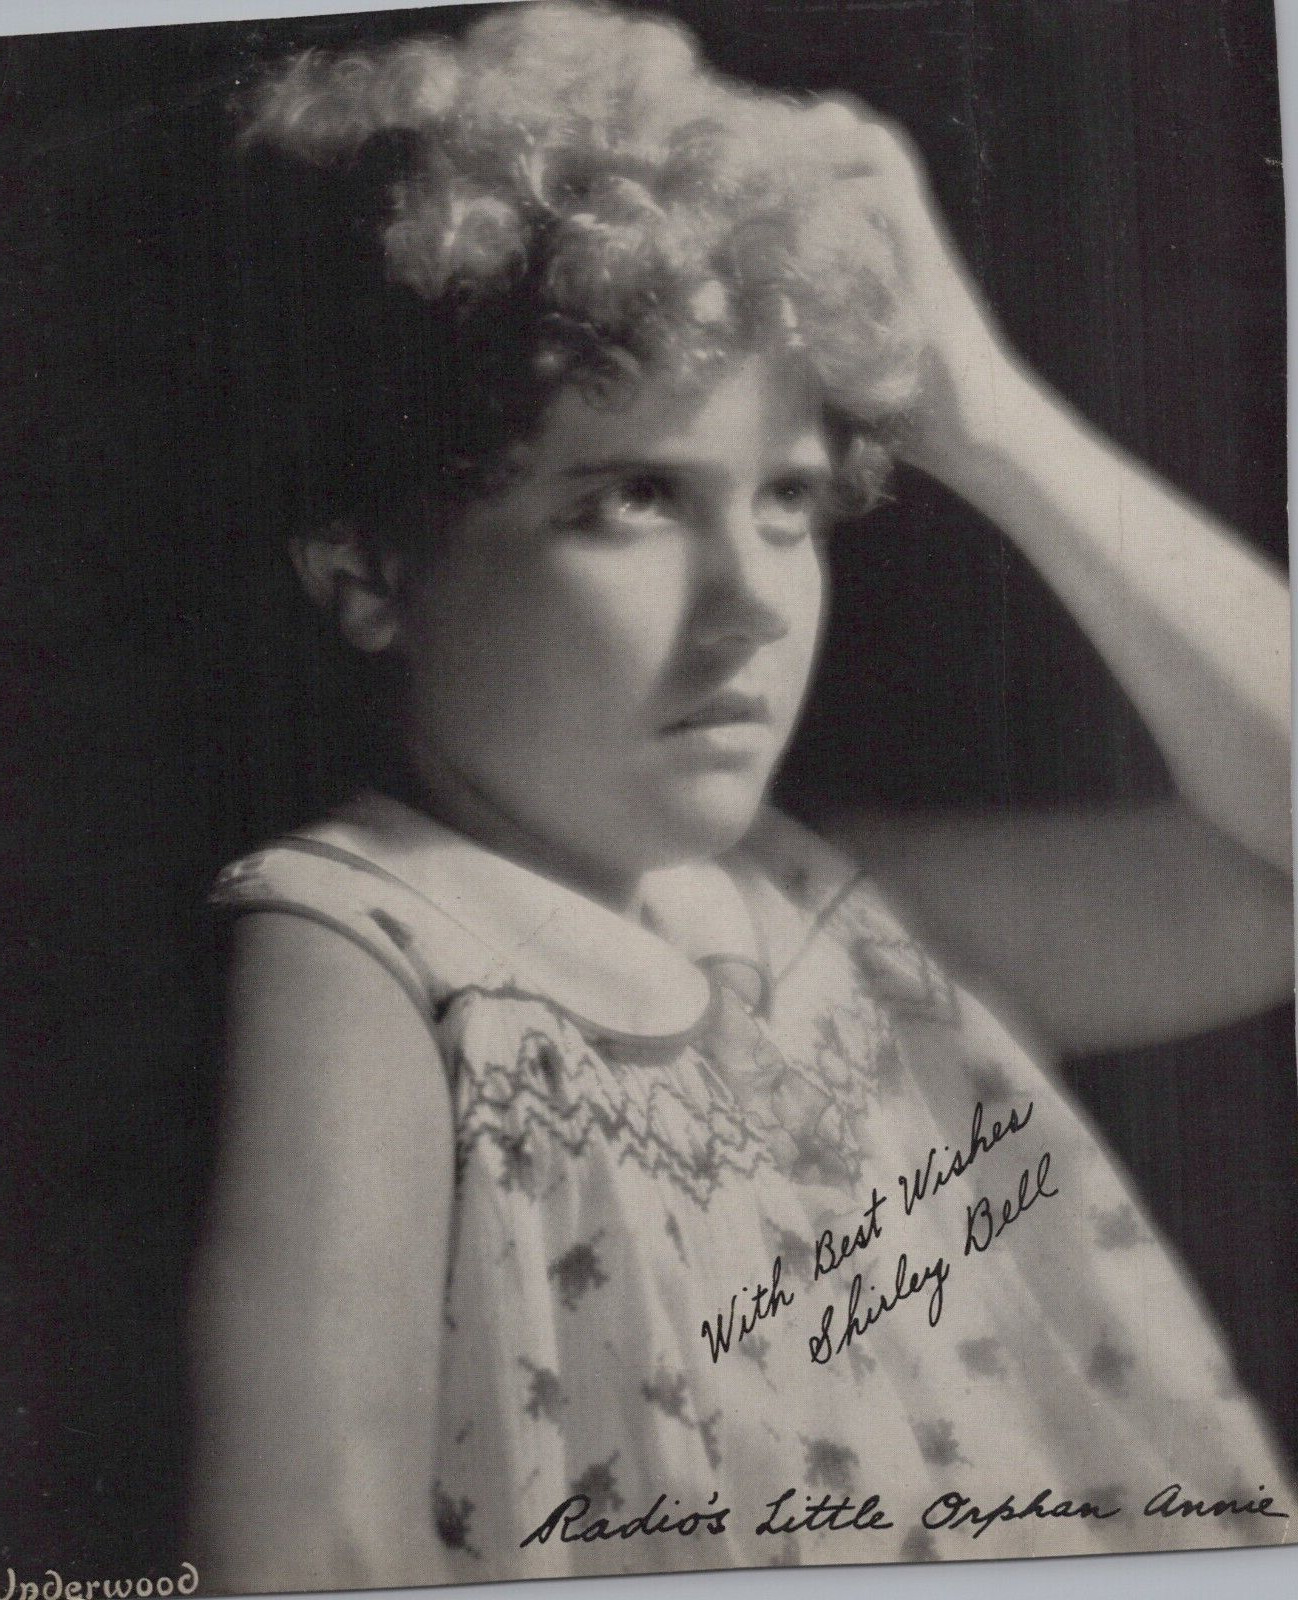 HOLLYWOOD SHIRLEY BELL RADIO\'S LITTLE ORPHAN ANNIE 1932 SIGNED ORIG Photo C27